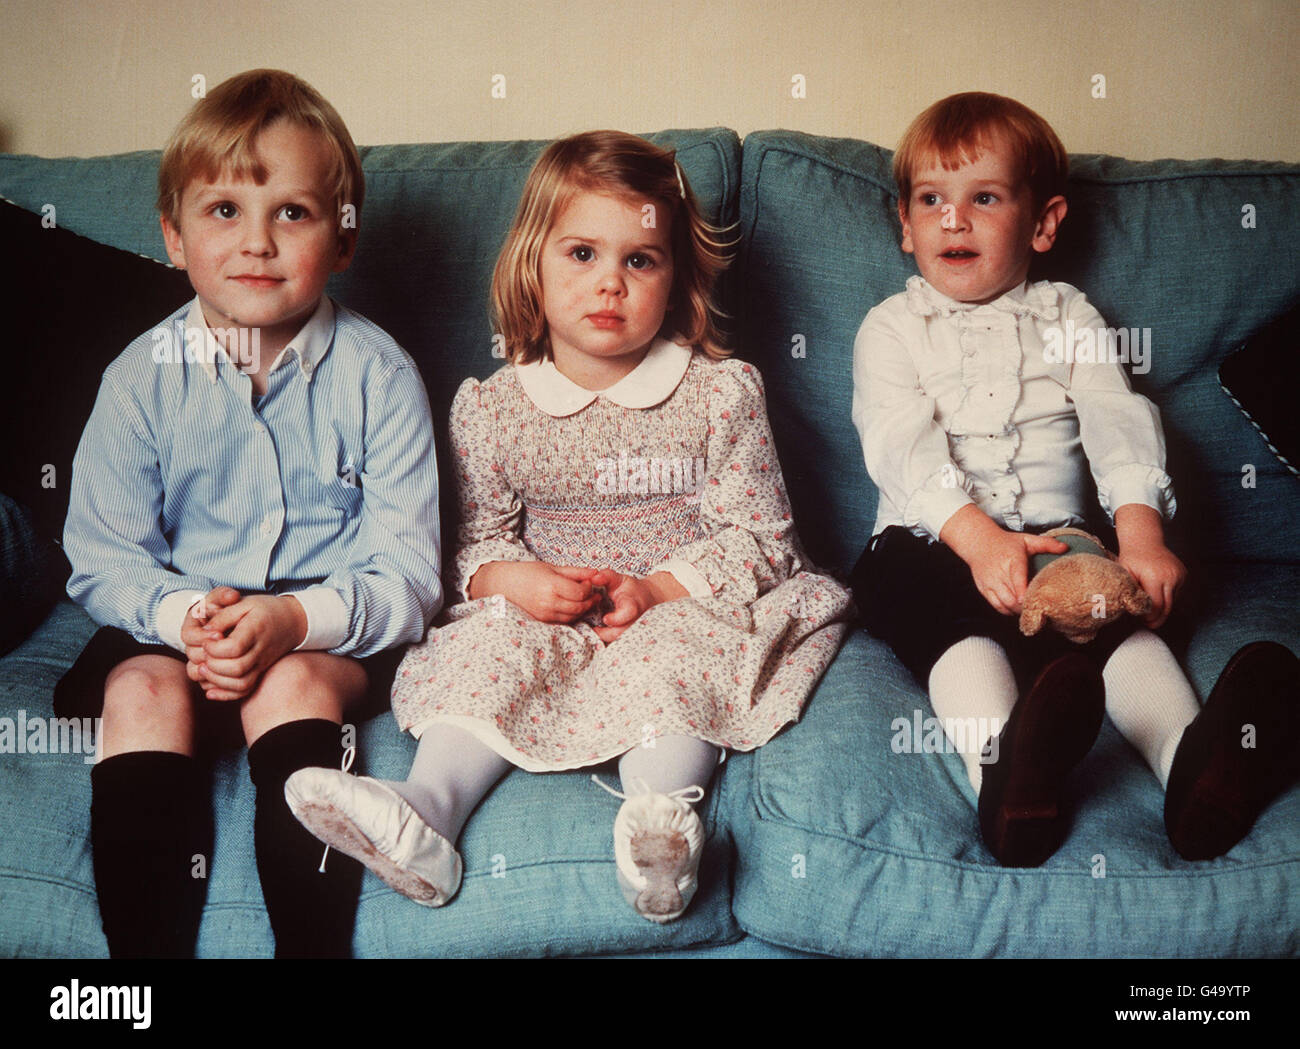 PA NEWS PHOTO 23/4/86 THREE OF THE CHILDREN WHO WILL ATTEND THE BRIDE SARAH FERGUSON WHEN SHE MARRIES PRINCE ANDREW IN WESTMINSTER ABBEY, LONDON ON 23/7/86. (FROM LEFT TO RIGHT) SEAMUS MAKIN FIVE YEAR OLD NEPHEW OF THE BRIDE, SARAH FERGUSON'S HALF SISTER ALICE AND HALF BROTHER ANDREW FERGUSON. Stock Photo